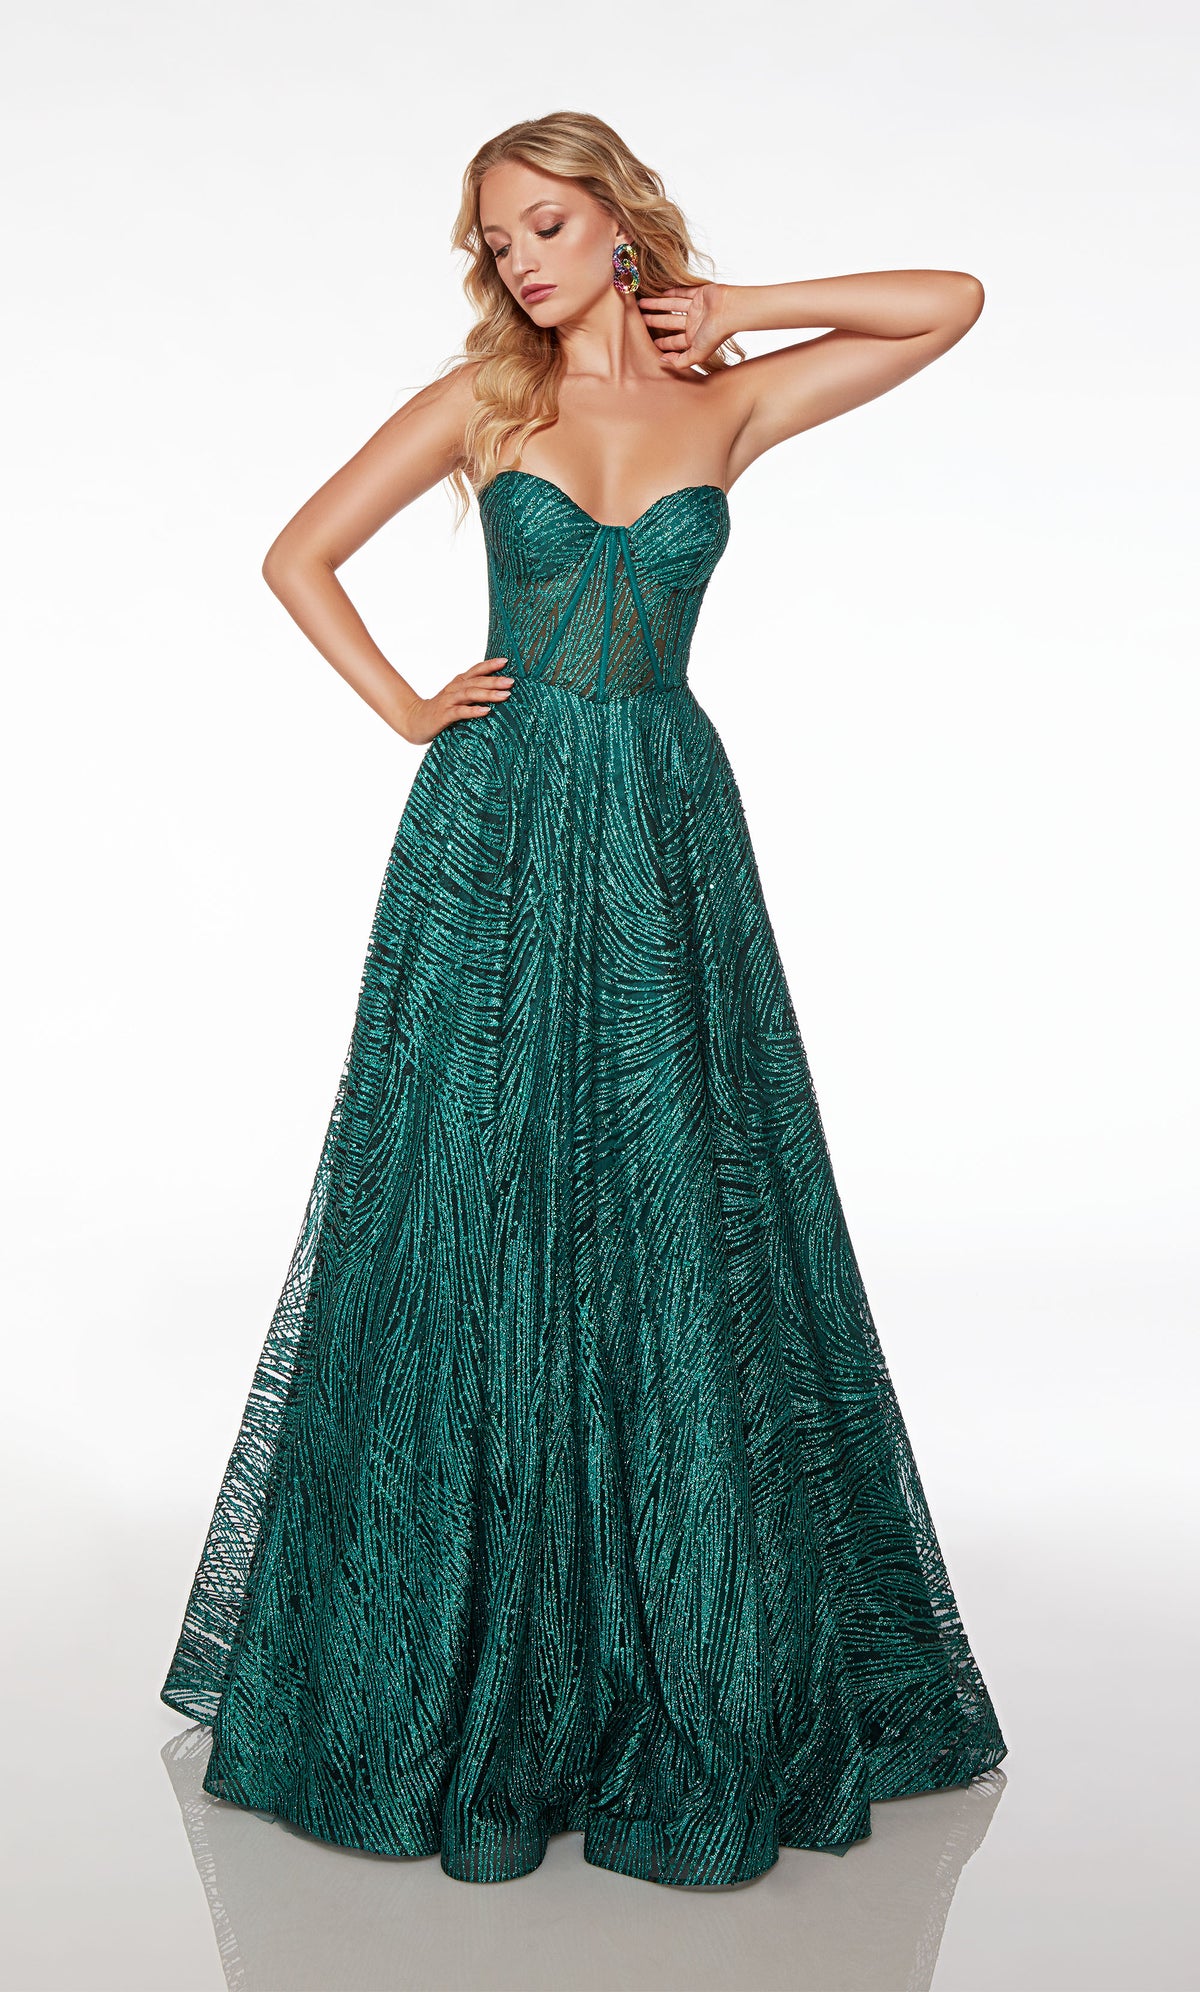 Strapless green corset dress with A-line skirt, lace-up back, and pockets, in stunning glitter tulle fabric for an chic and functional look.